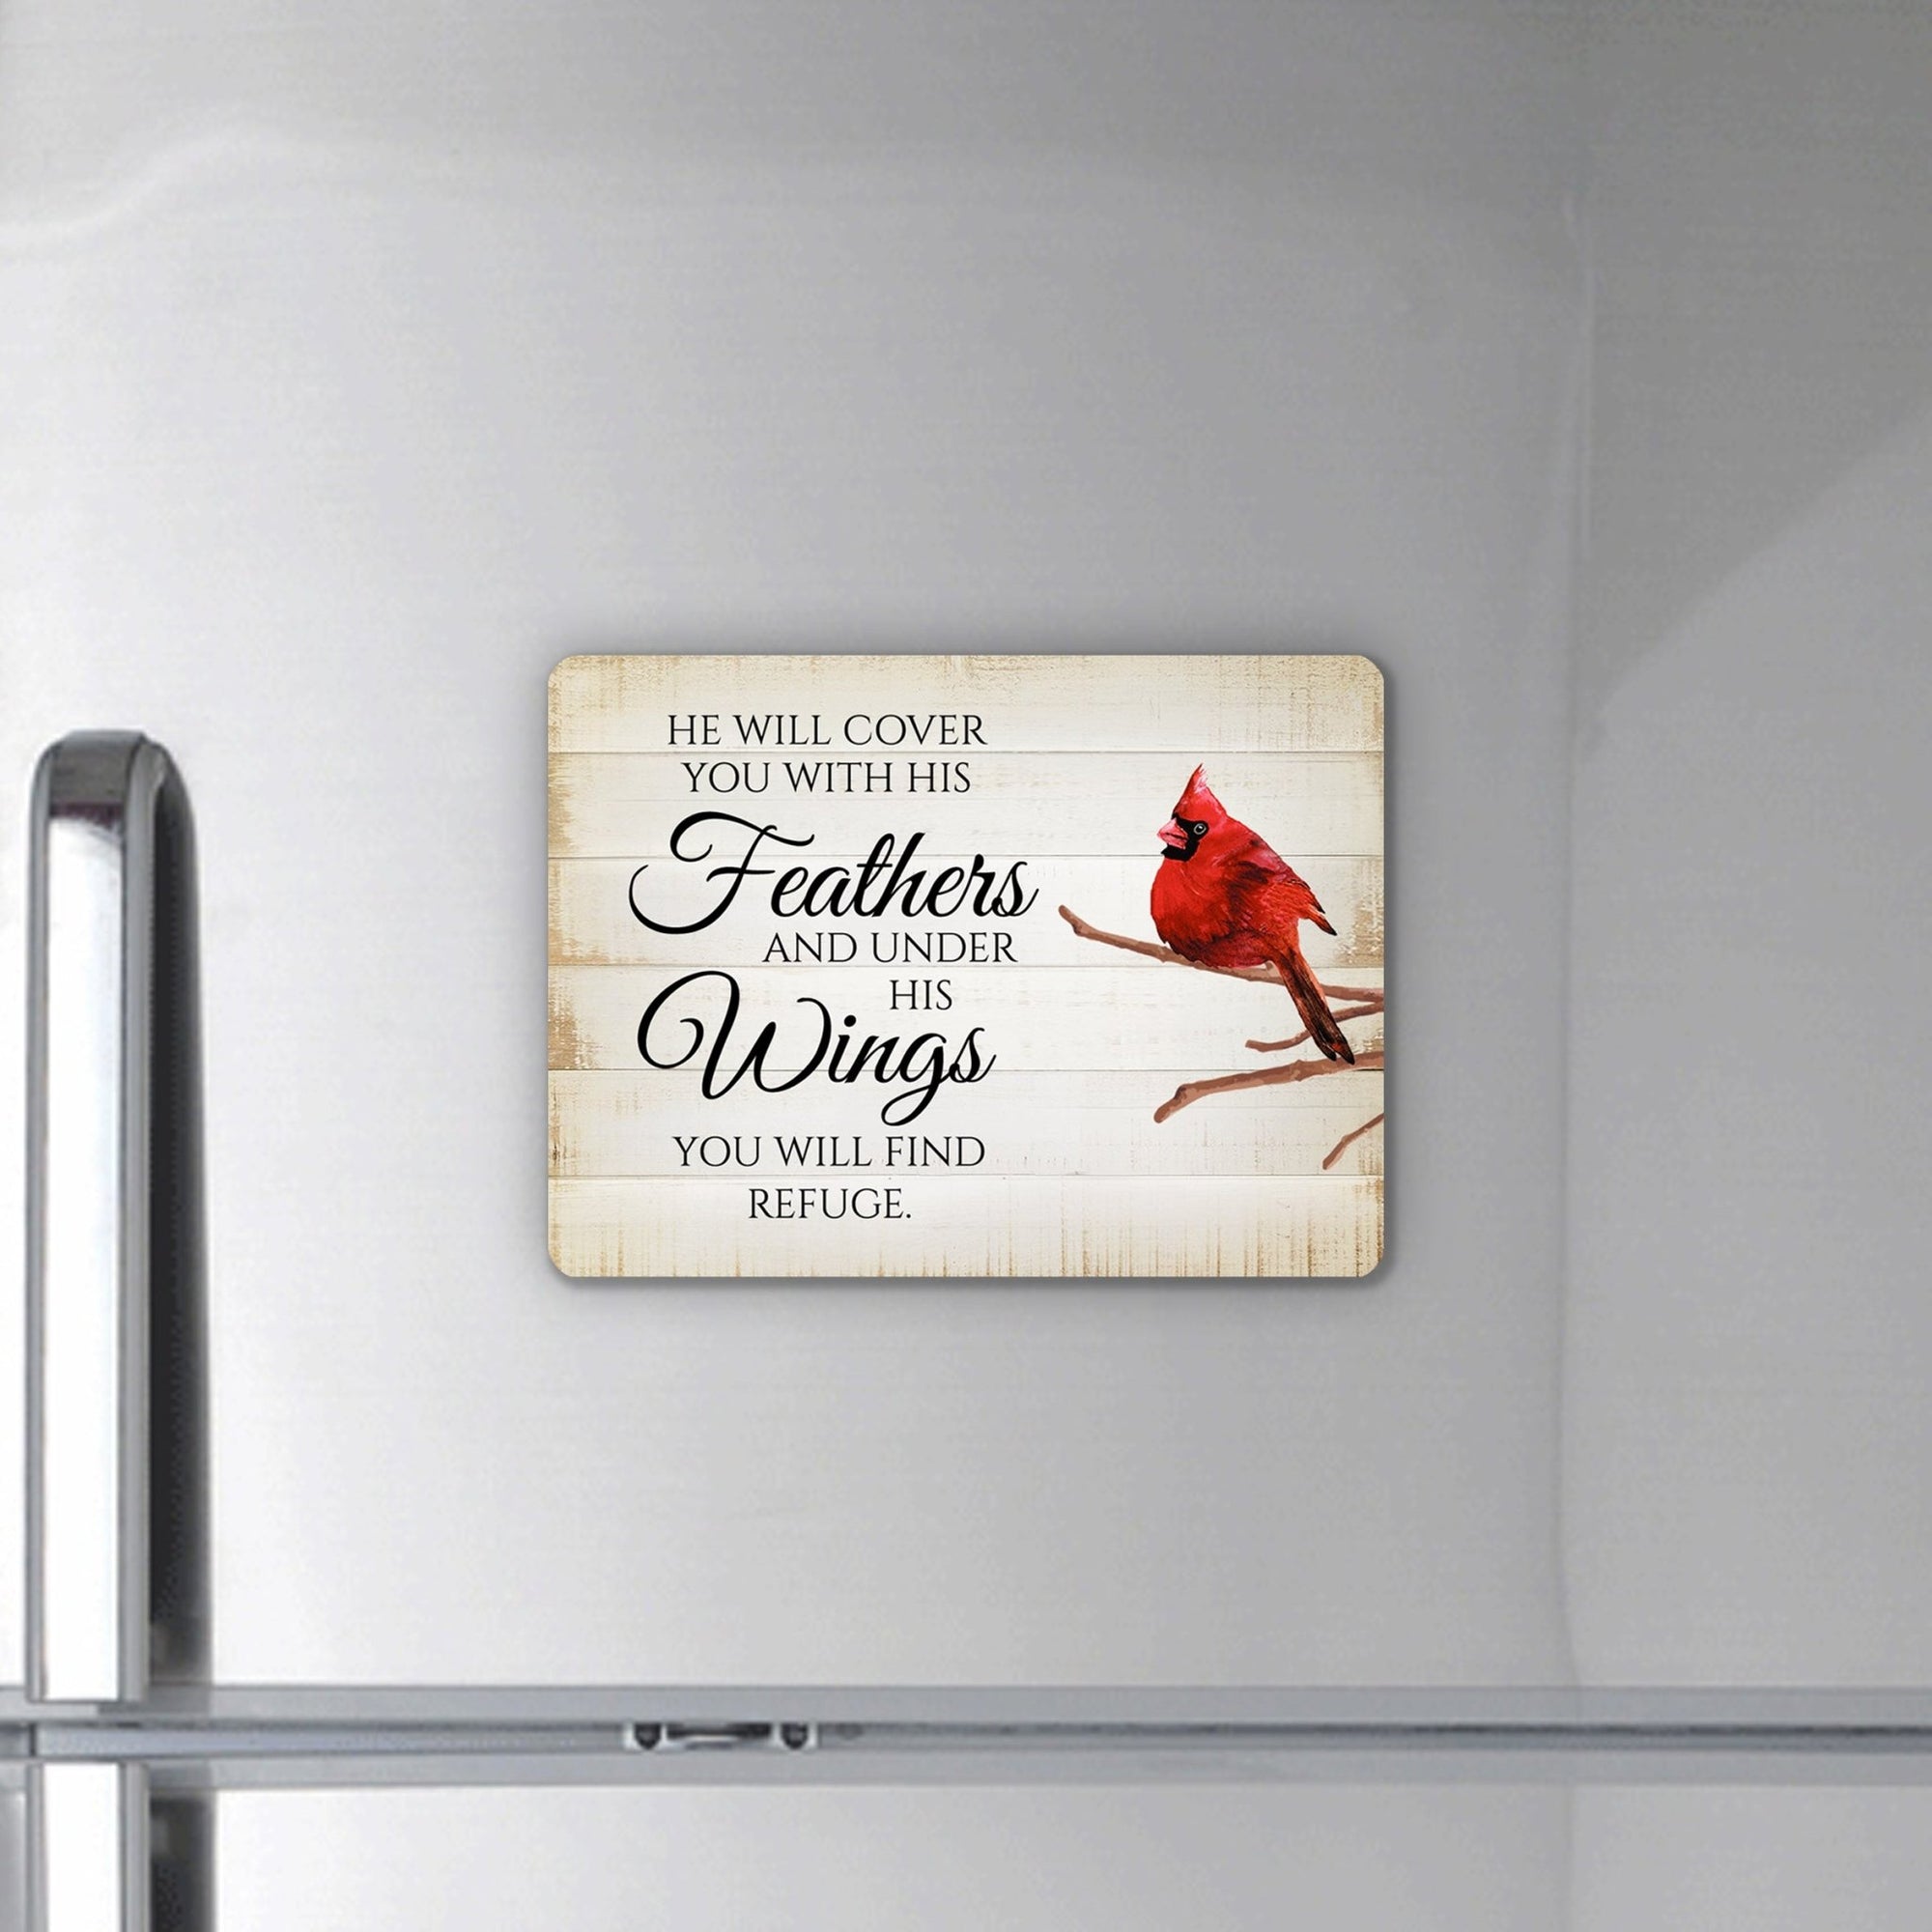 Elegant Vintage-Inspired Cardinal Wooden Magnet Printed With Everyday Inspirational Verses Gift Ideas - He Will Cover - LifeSong Milestones